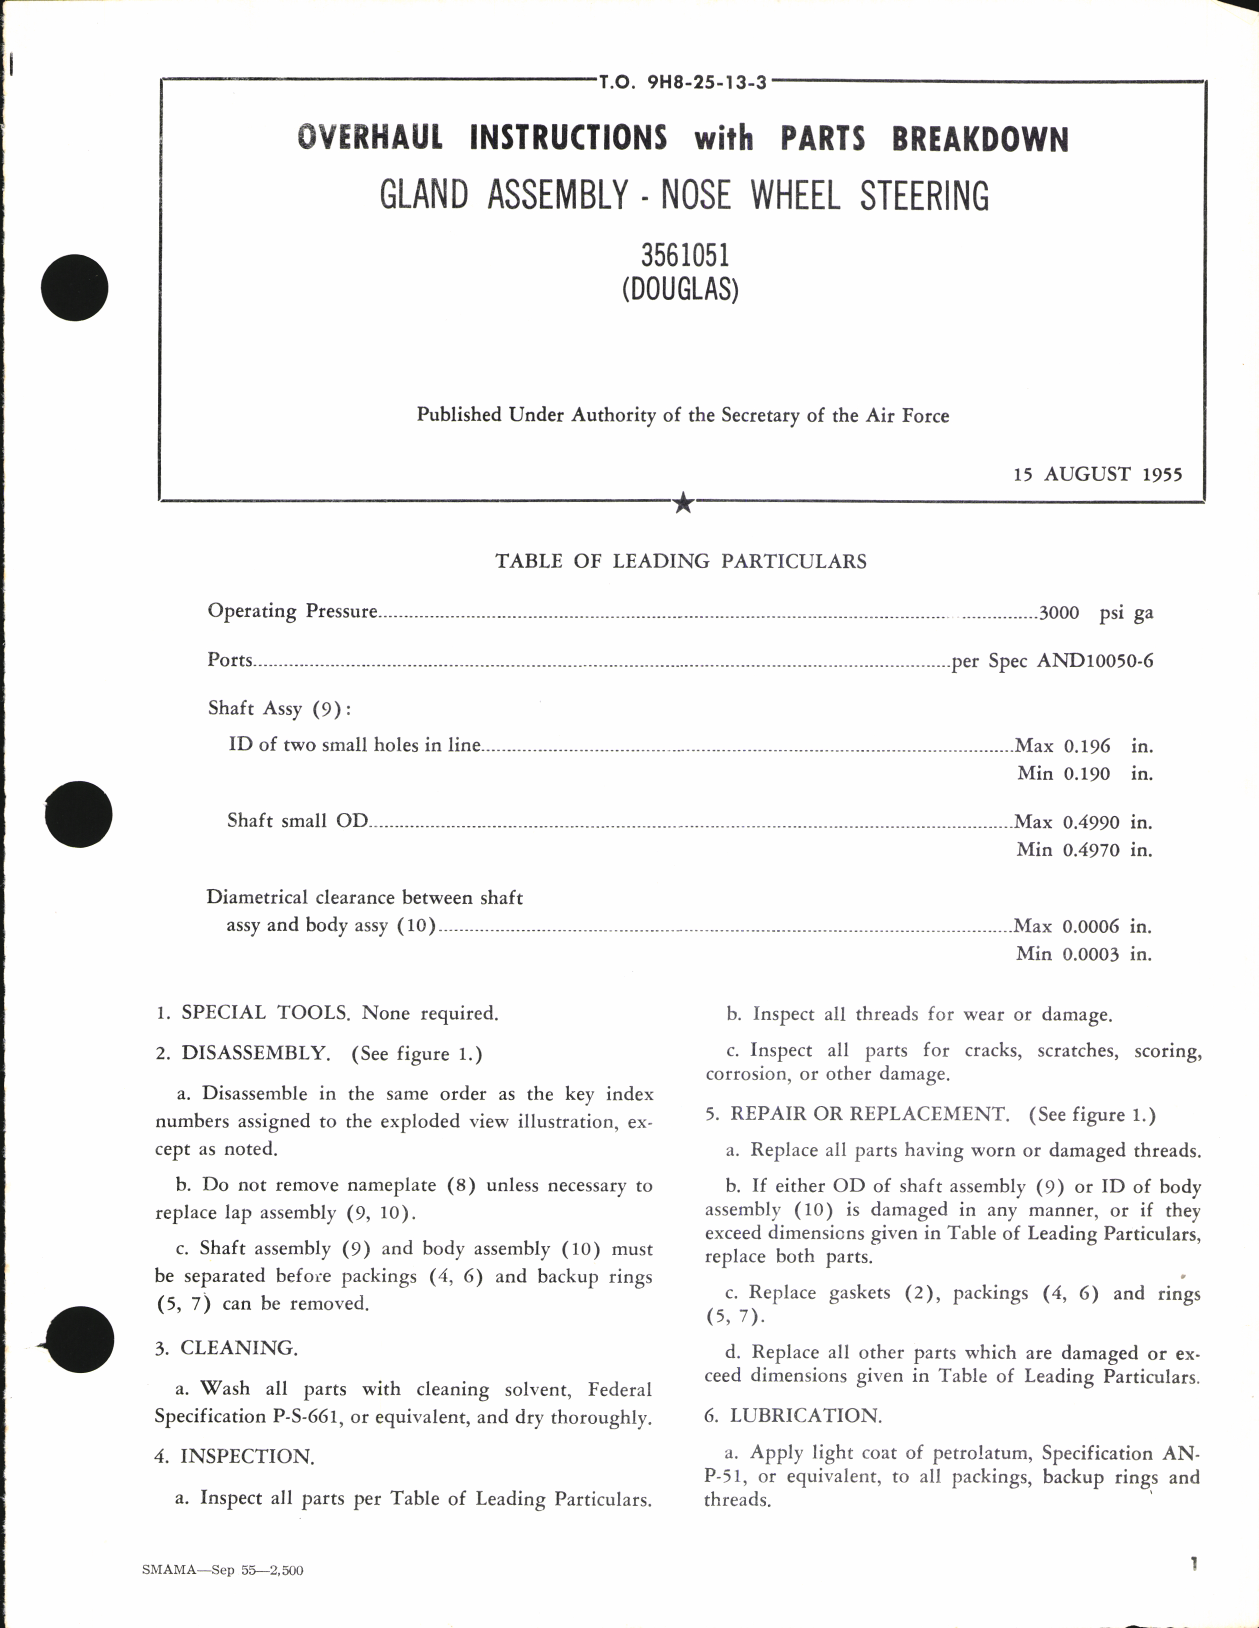 Sample page 1 from AirCorps Library document: Overhaul Instructions with Parts Breakdown for Gland Assembly, Nose Wheel Steering, 3561051